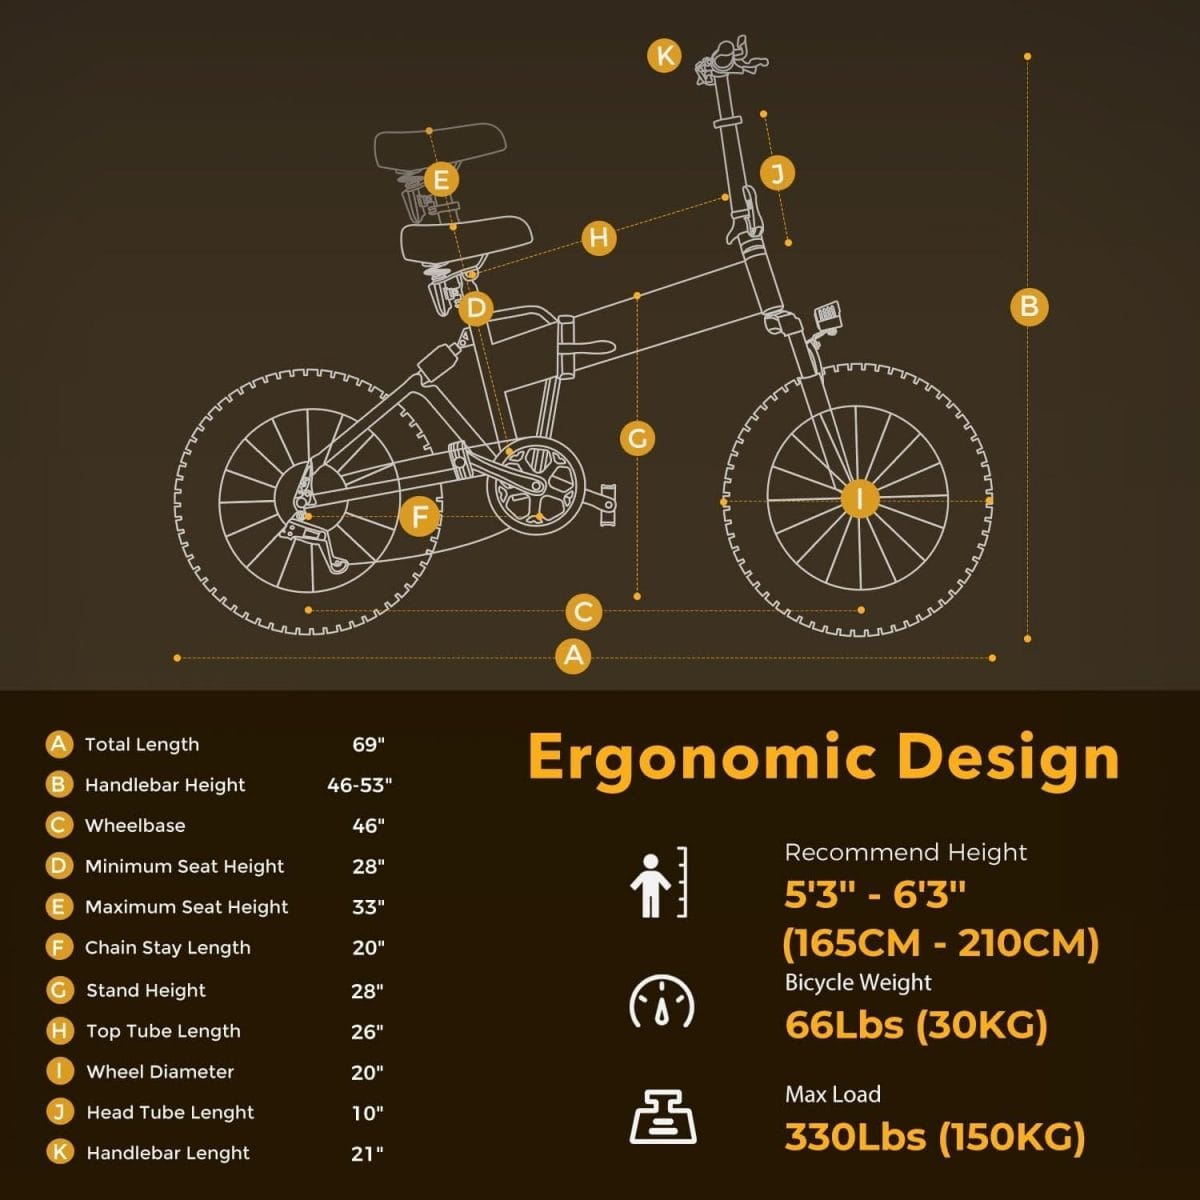 CYCROWN Electric Bike Adults, 2XFaster Charge, 48V 12.5AH/20AH Removable Battery, 20 x 4.0 Fat Tire Foldable Electric Bicycle, 750W Motor, Dual Shock Absorber, Shimano 7-Speed